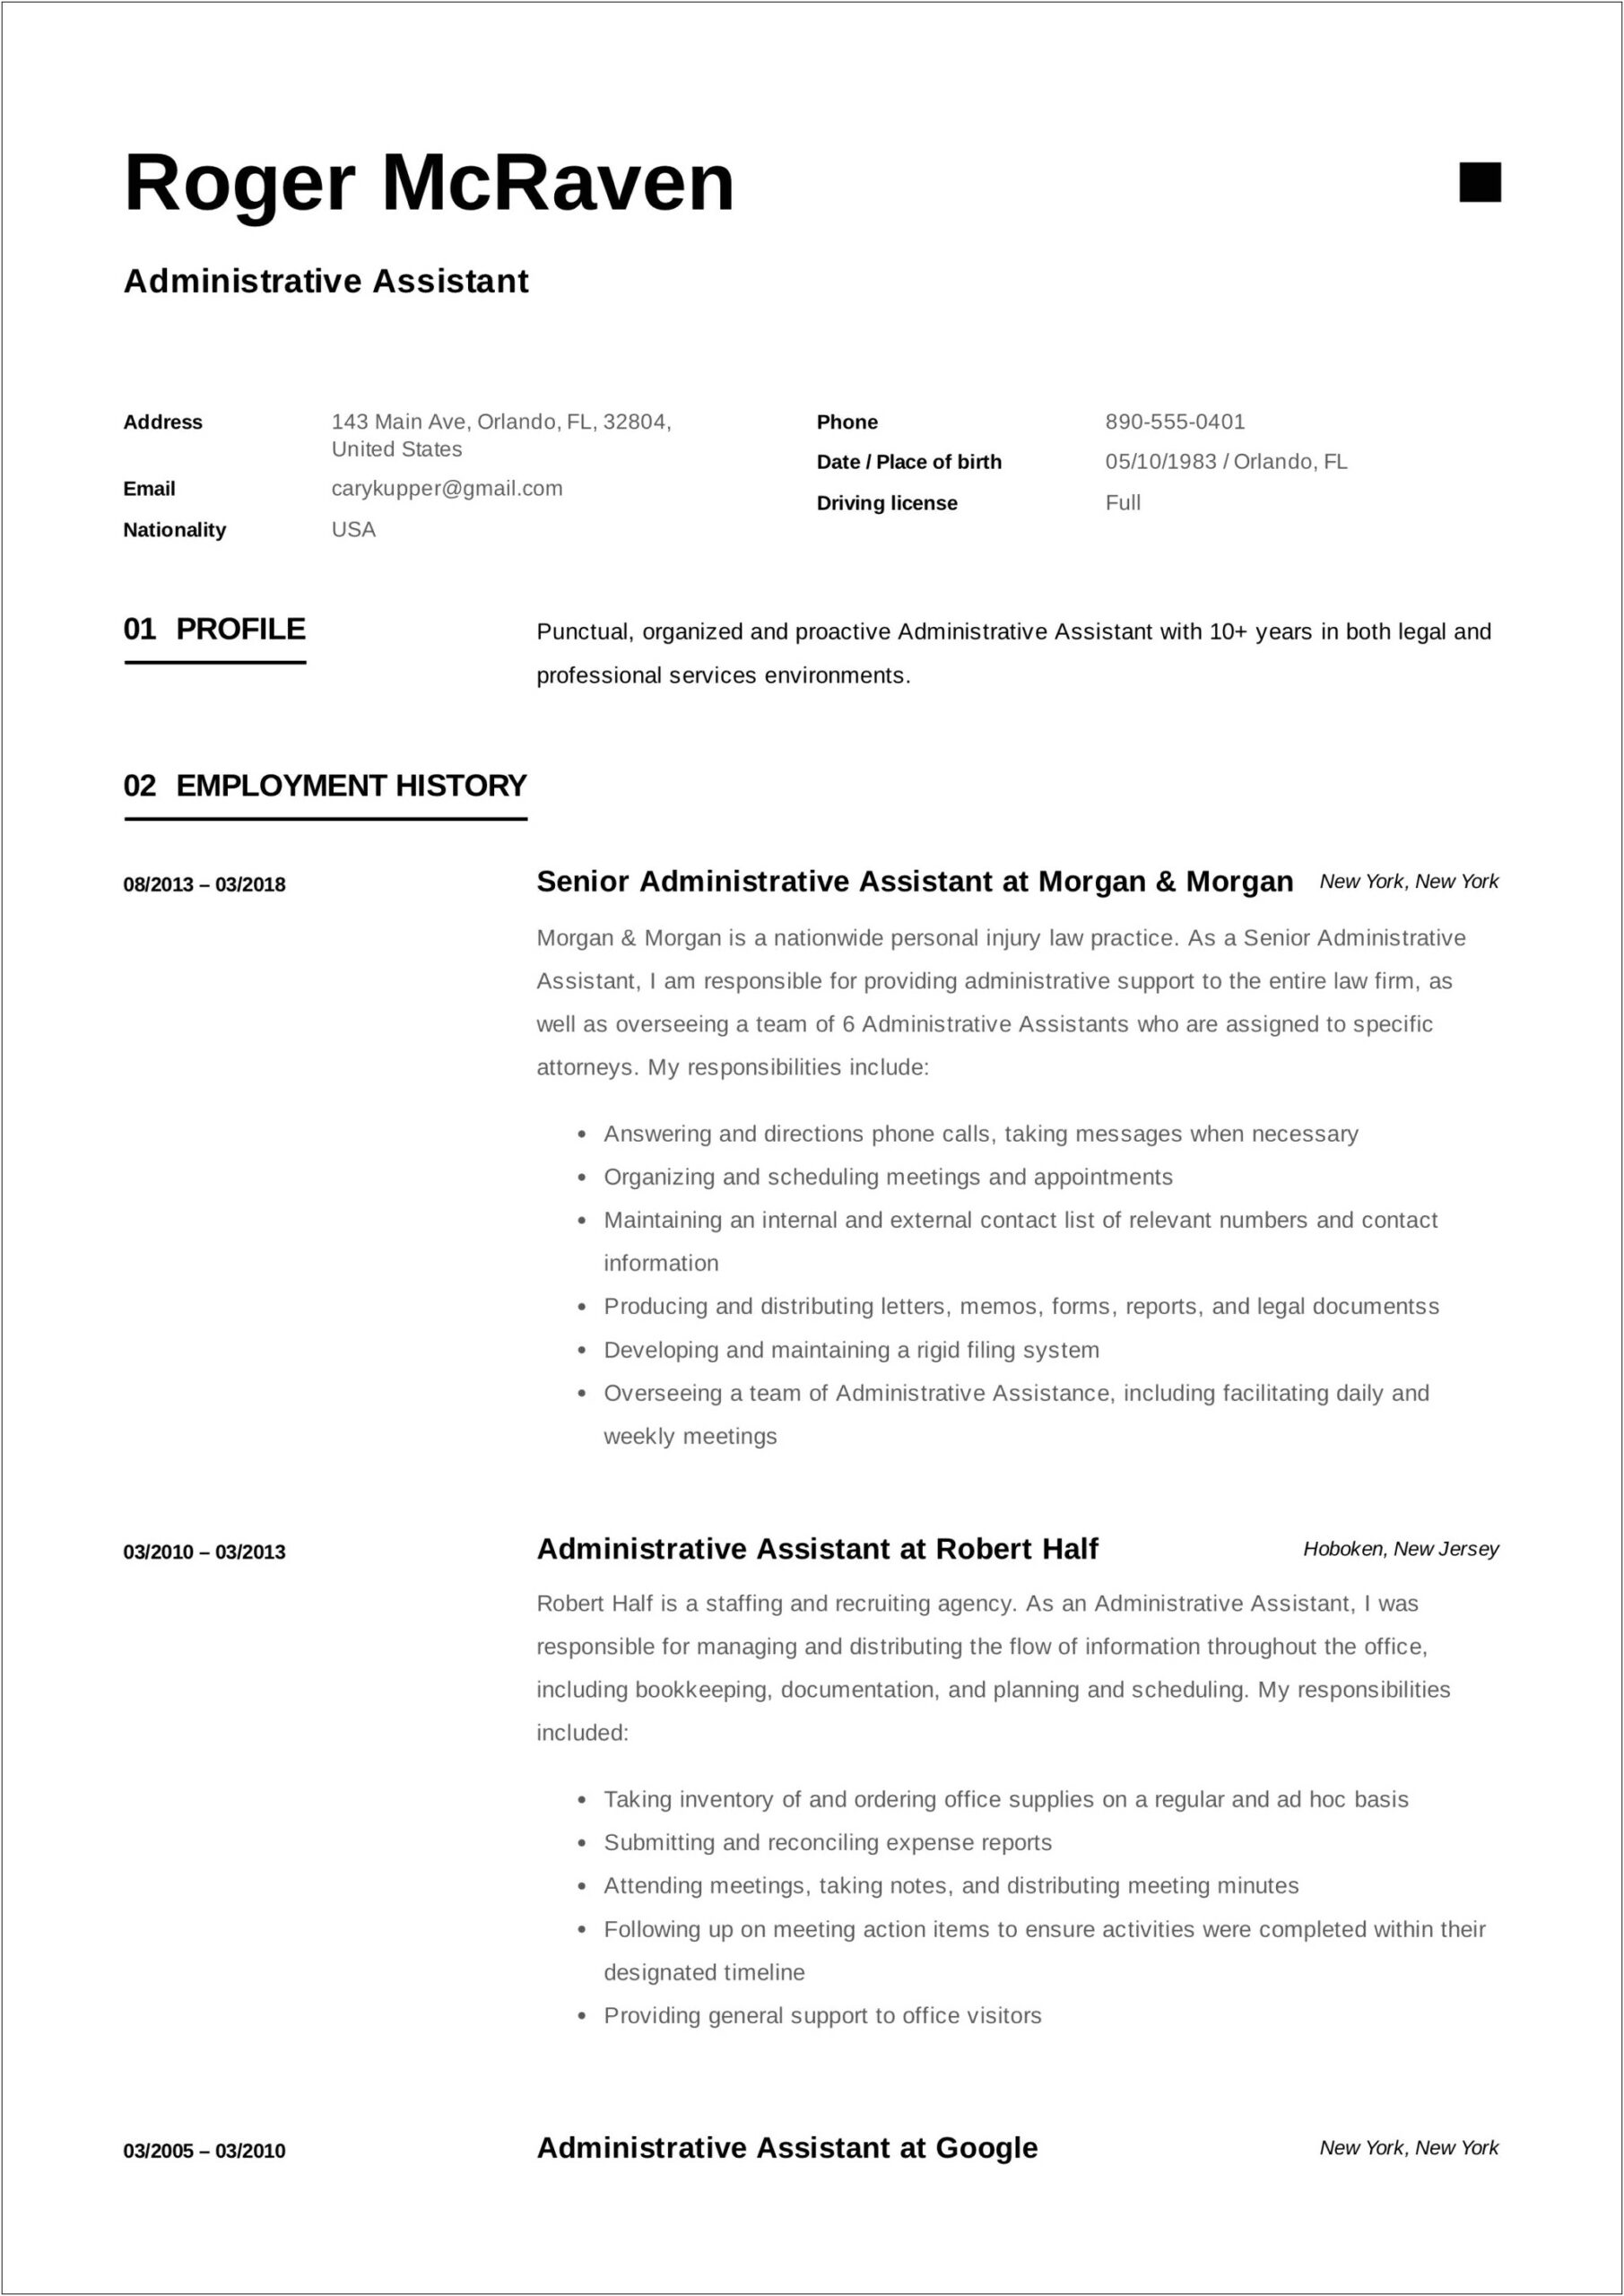 Resume Summary Statement For Administrative Assistant